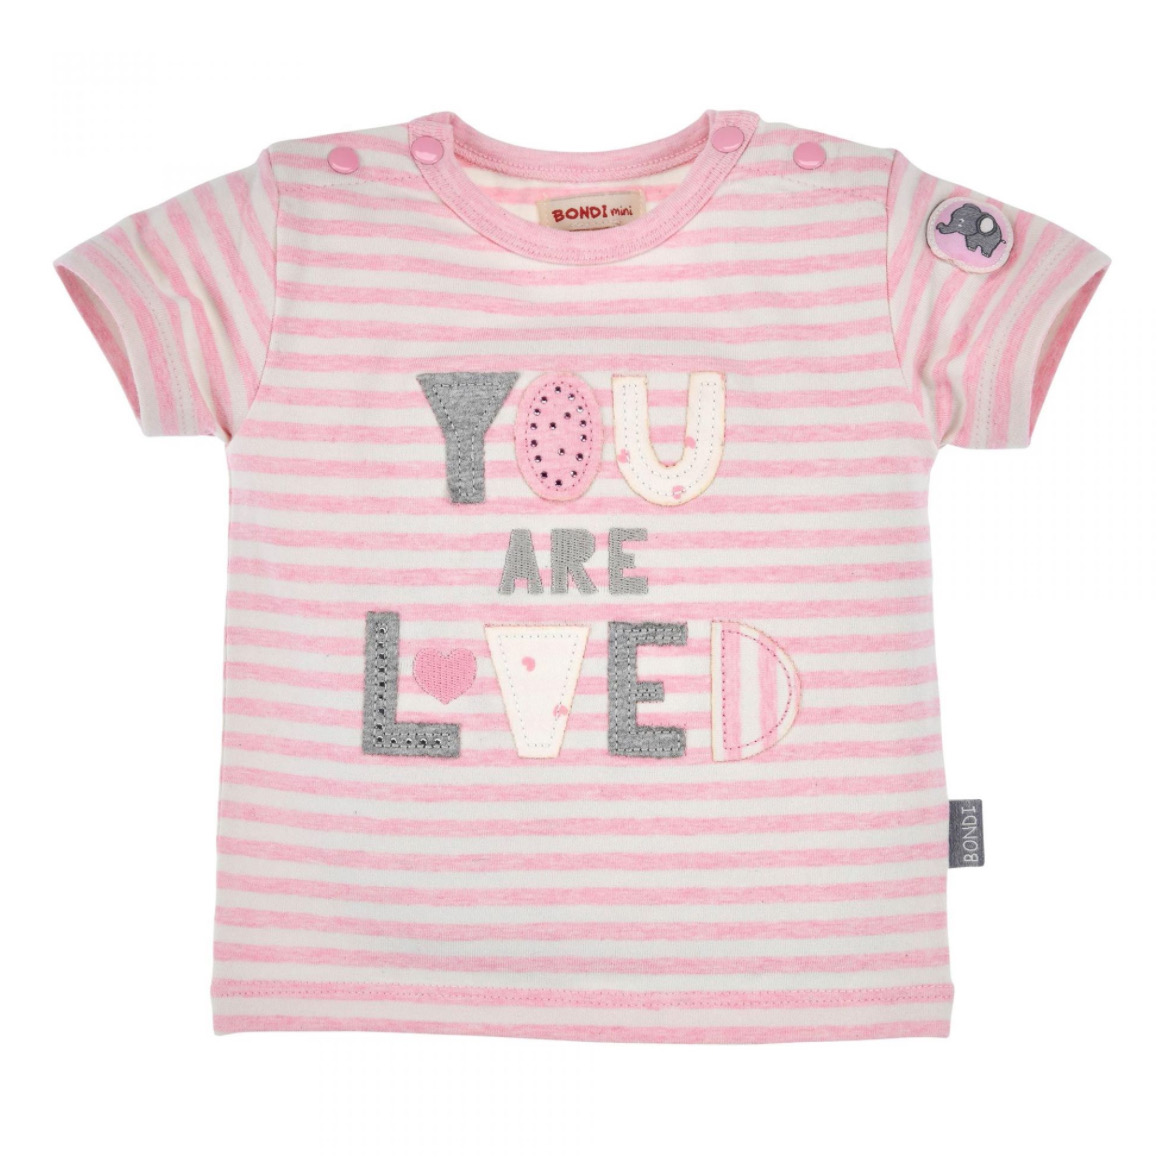 Bondi Baby T-Shirt You are loved